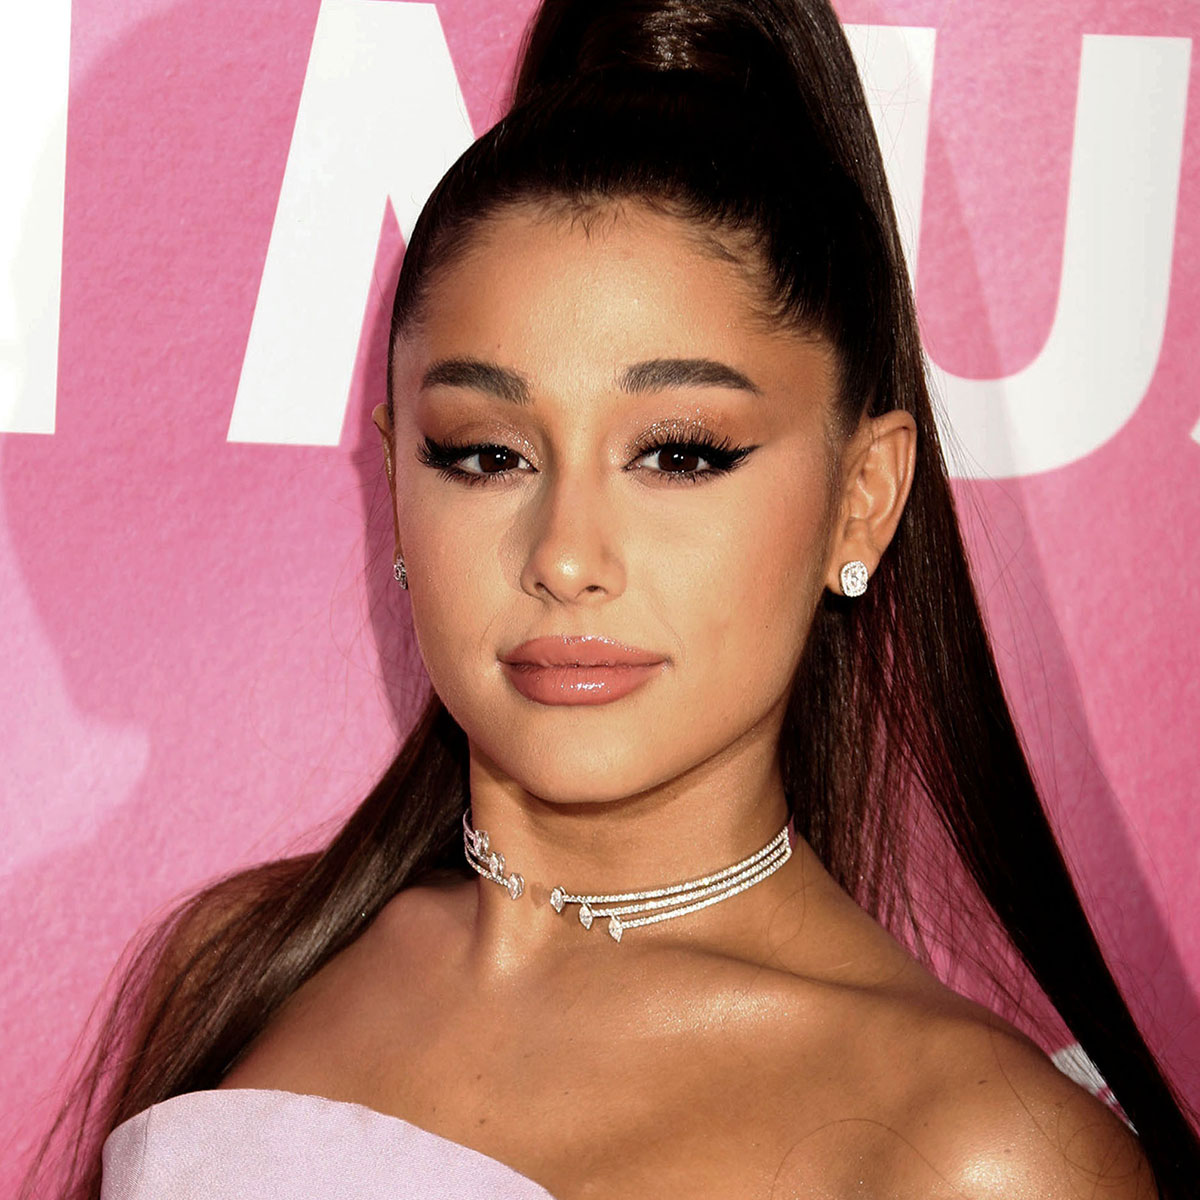 Ariana Grande Porn Caption Spank - Ariana Grande Turned Up The Heat In A Cone Bra And High-Slit Skirt On  'RuPaul's Drag Race' - SHEfinds